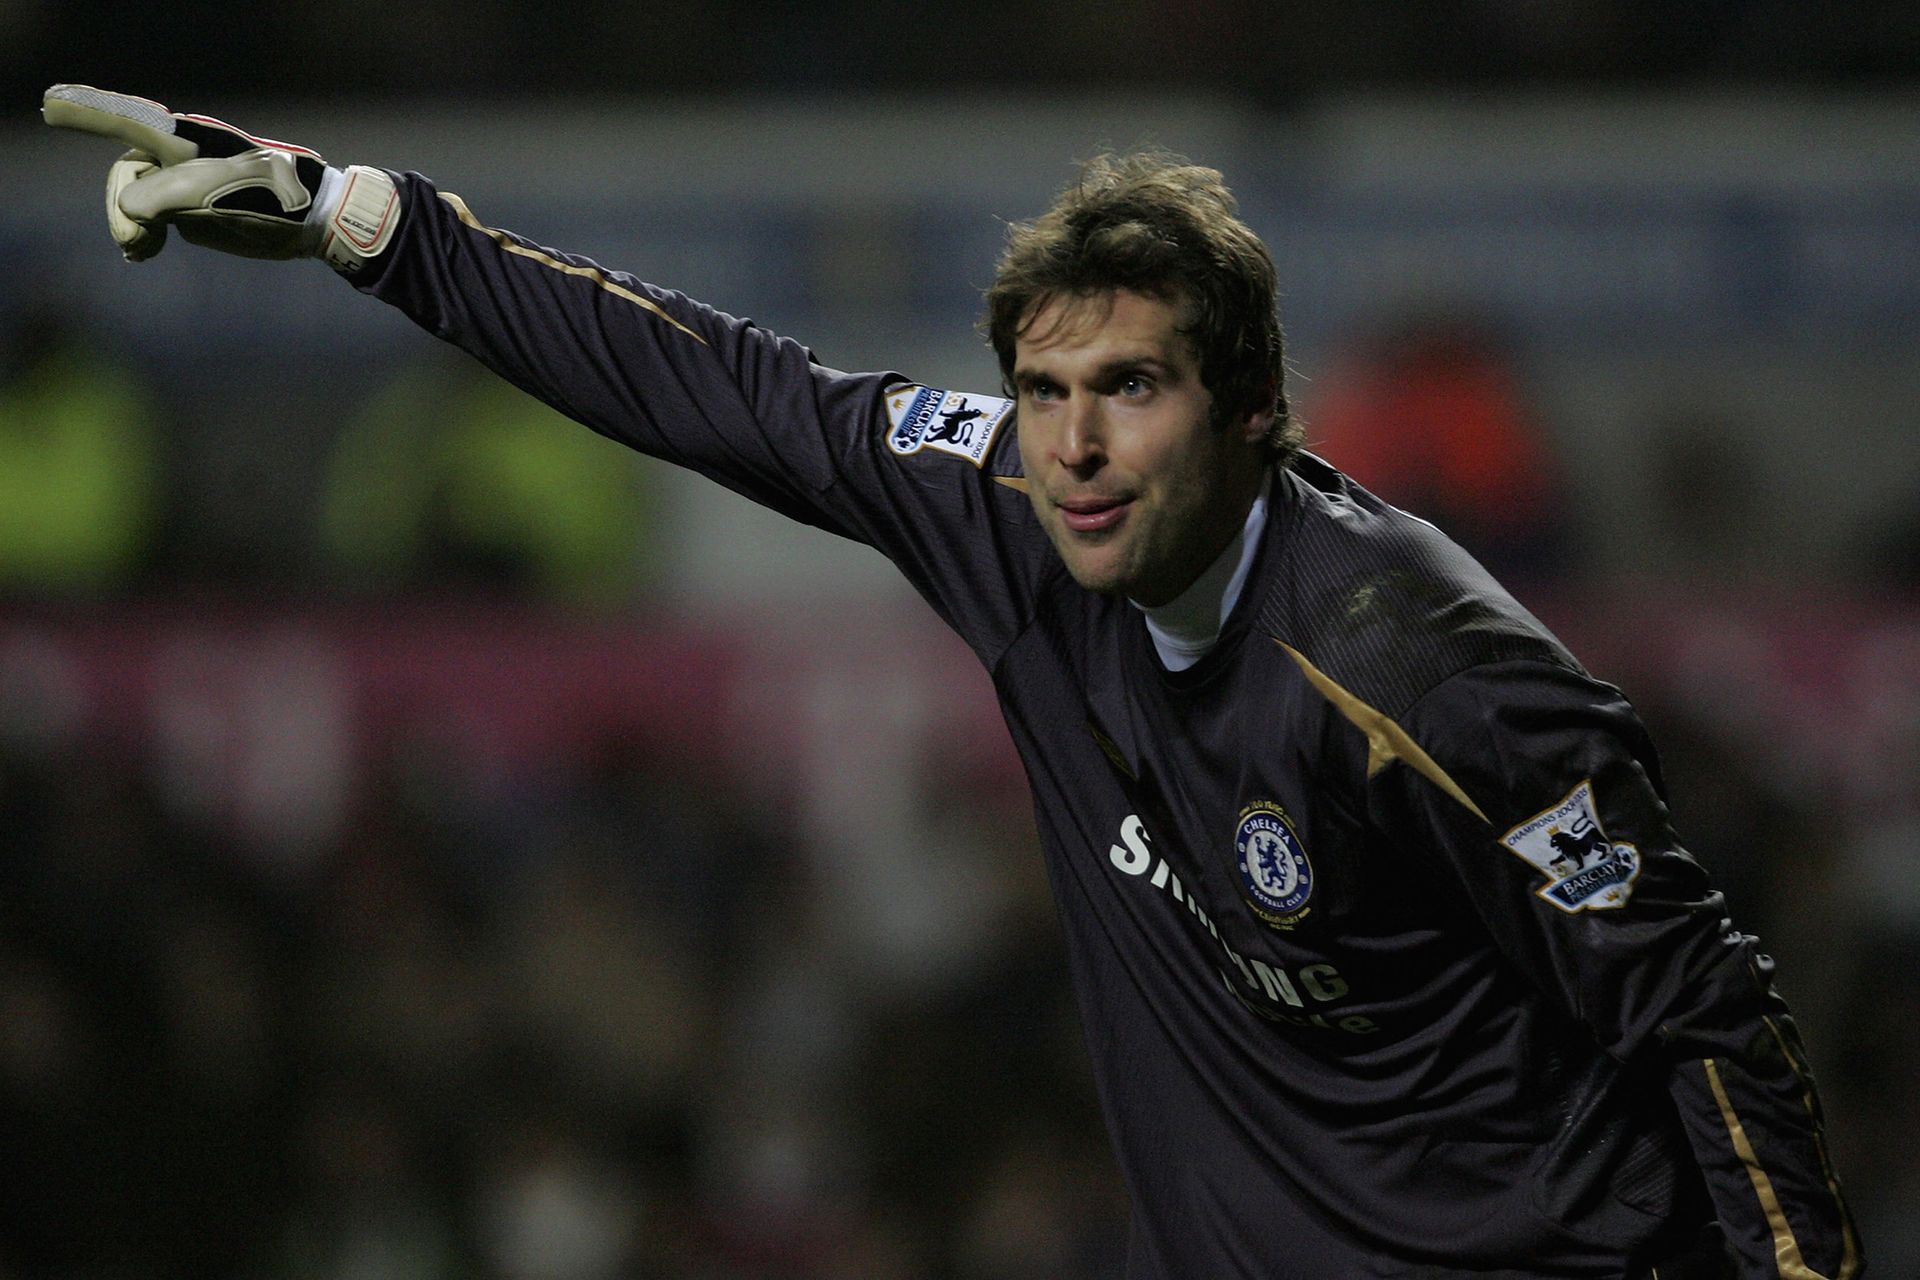 <p>                     Petr Cech was one of the best goalkeepers in the world for most of the 2000s and the Czech won a series of trophies in an 11-year spell at Chelsea.                   </p>                                      <p>                     Named by IFFHS as the world's best goalkeeper in 2005, Cech was European goalkeeper of the year in 2005, 2007 and 2008. He was also part of the successful Czech Republic side which reached the semi-finals of Euro 2004.                   </p>